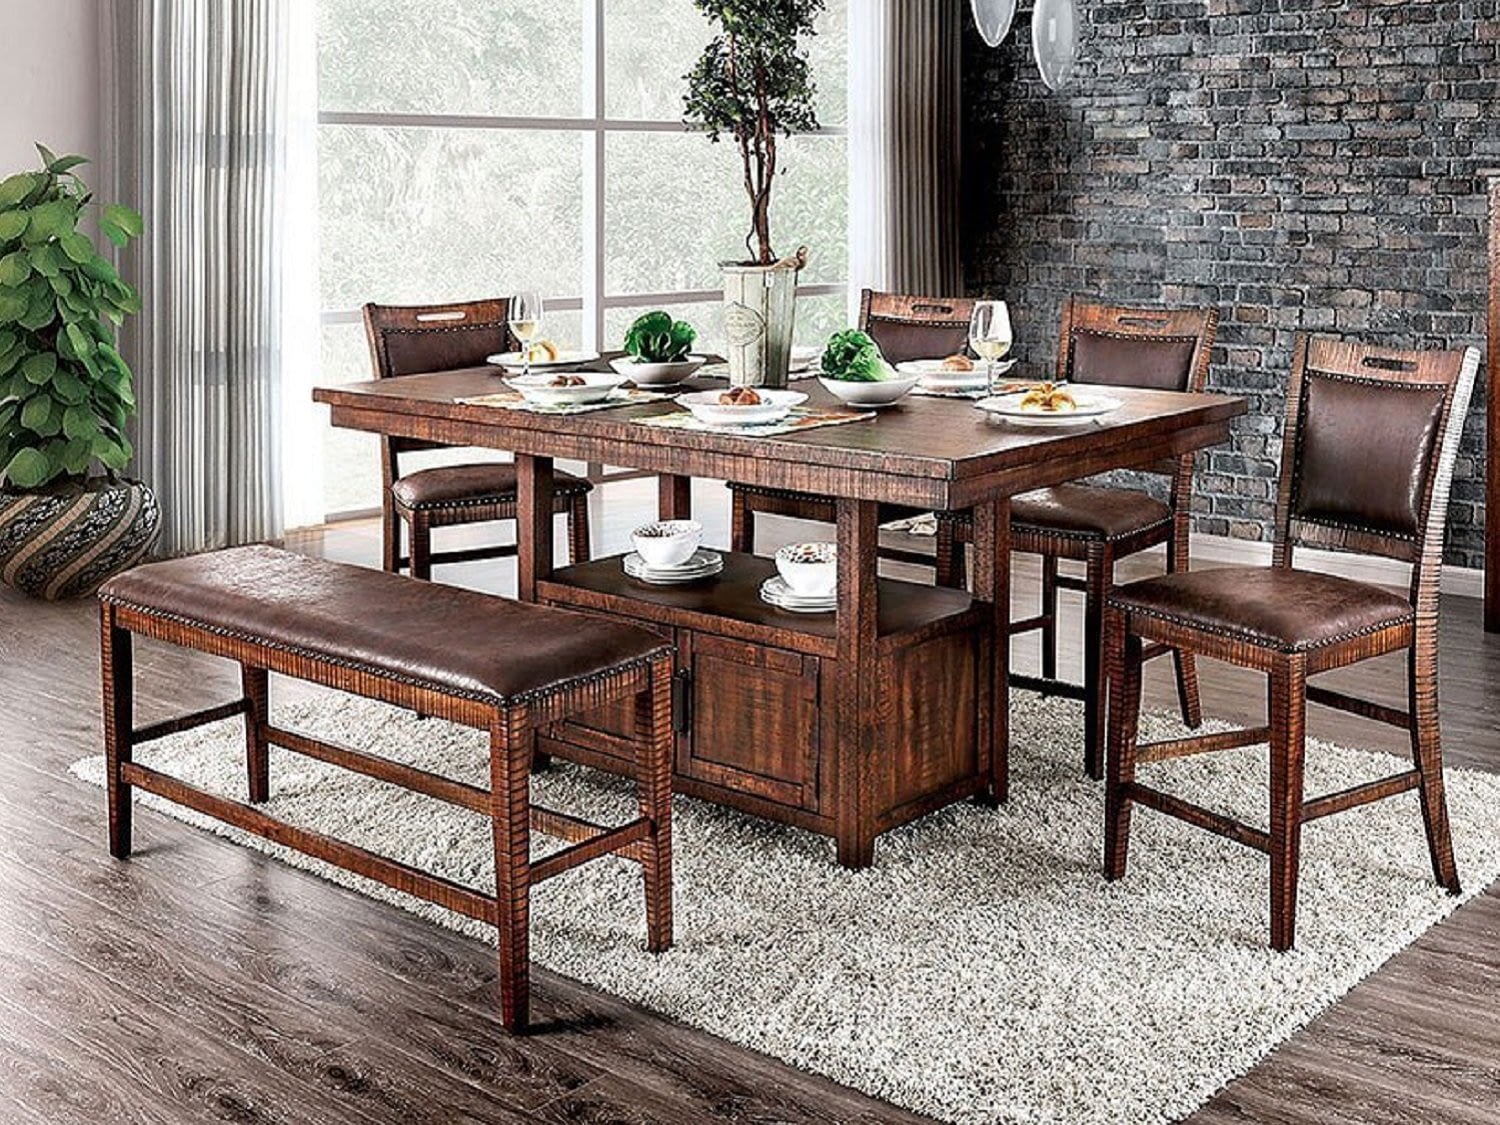 FAIRLEE 6-Seat Counter Height Dining Set